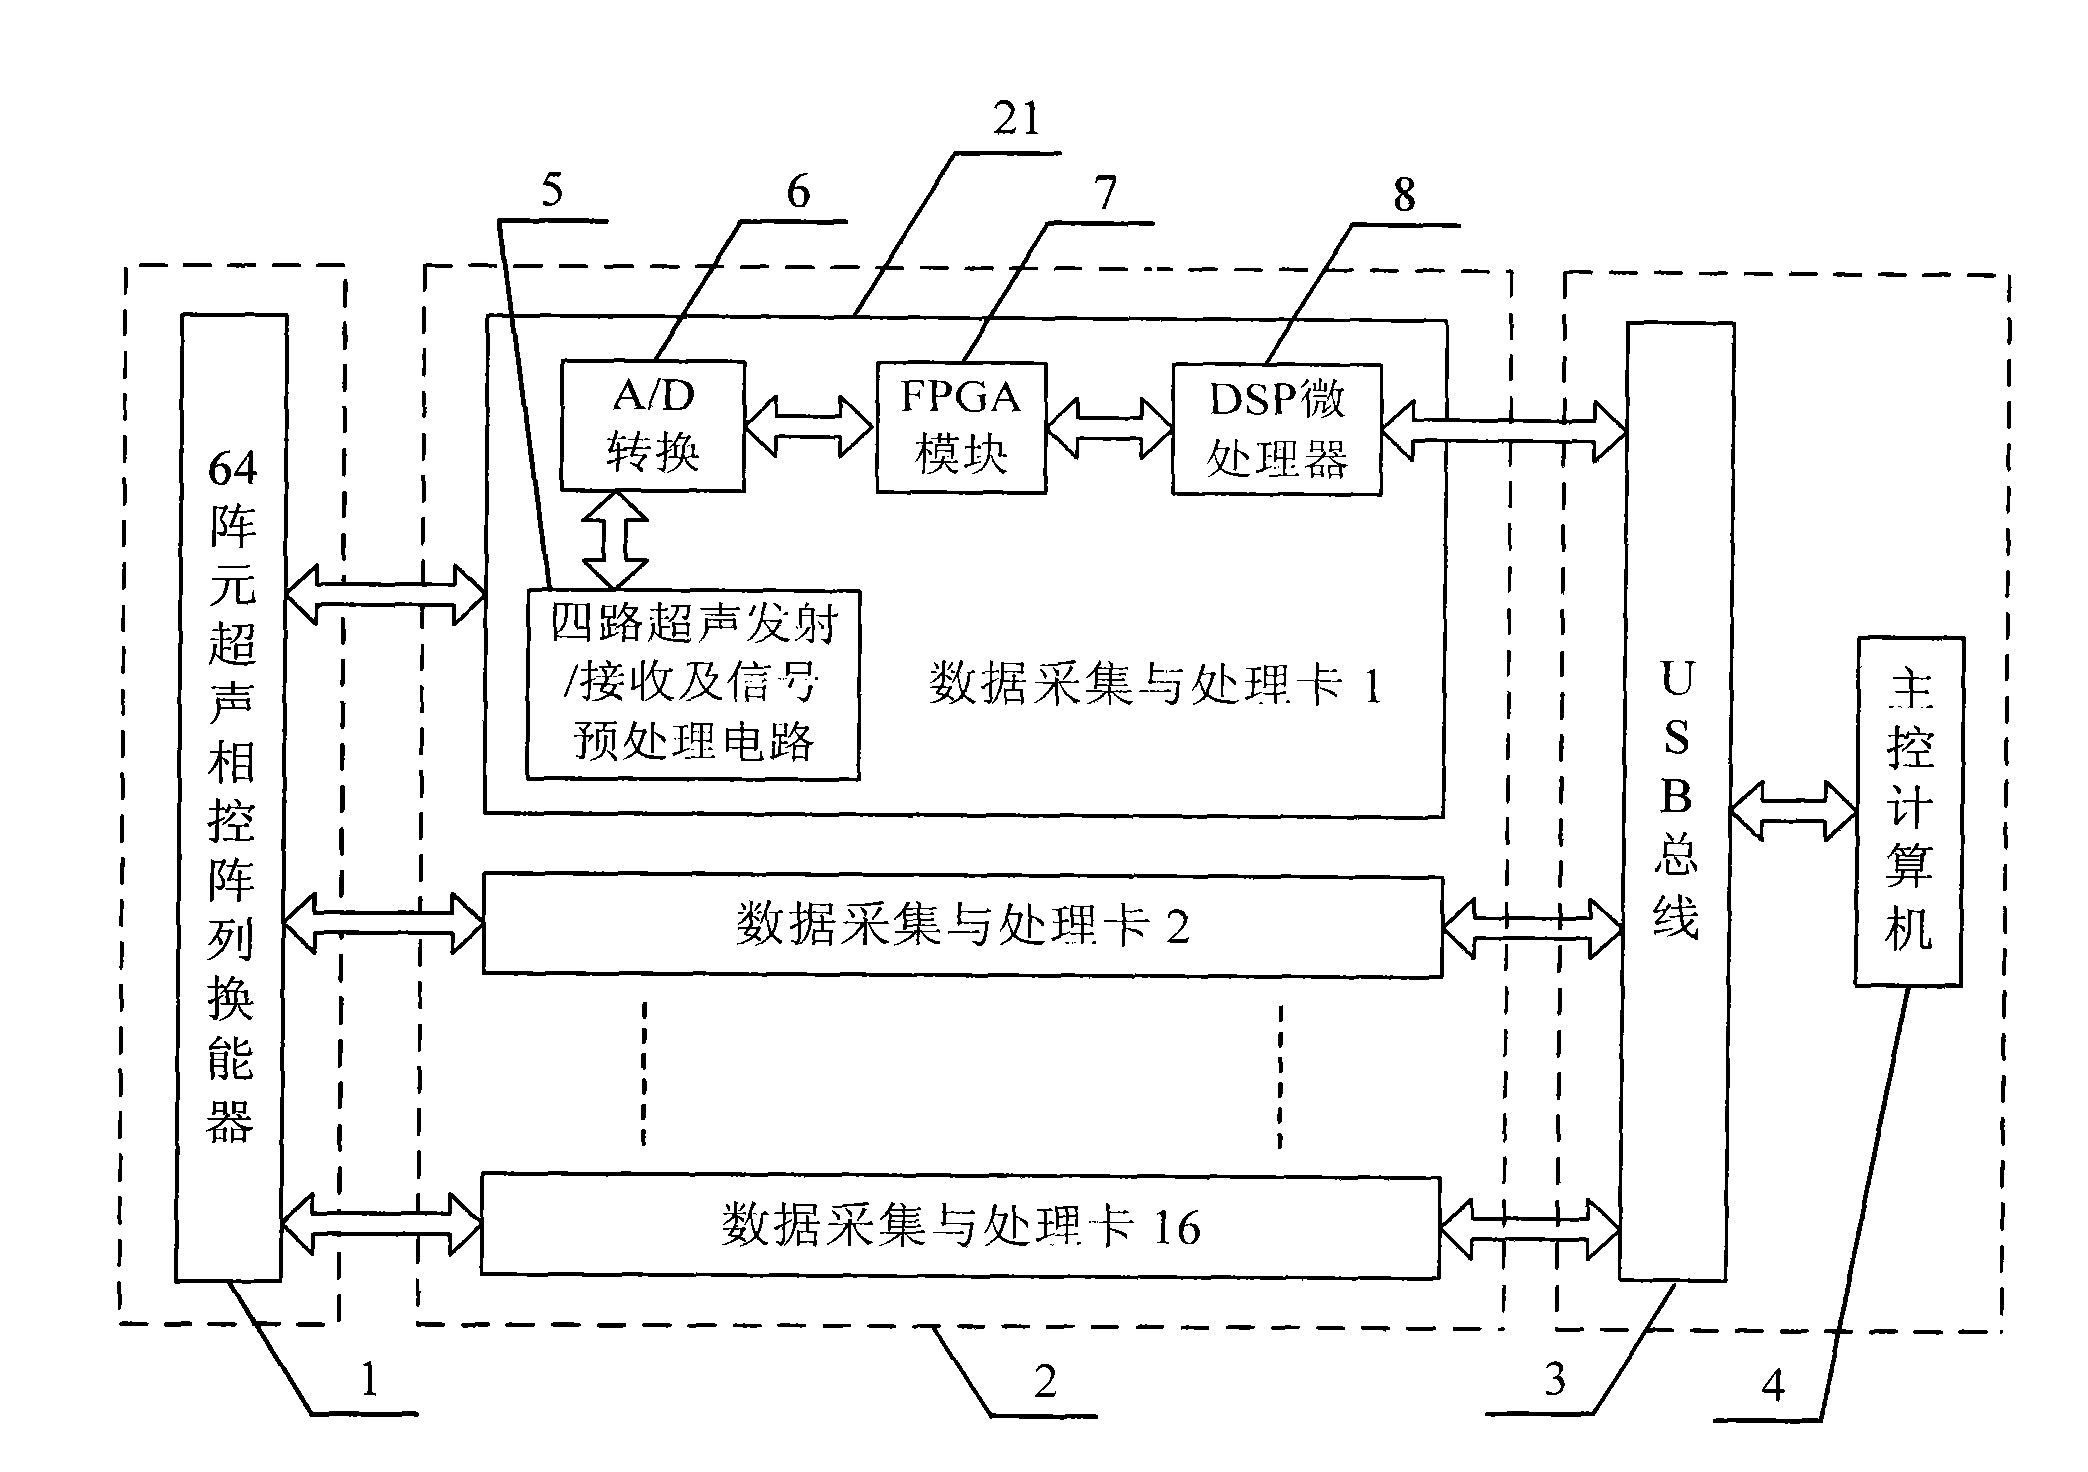 Phased array ultrasonic detection, data acquisition and process device